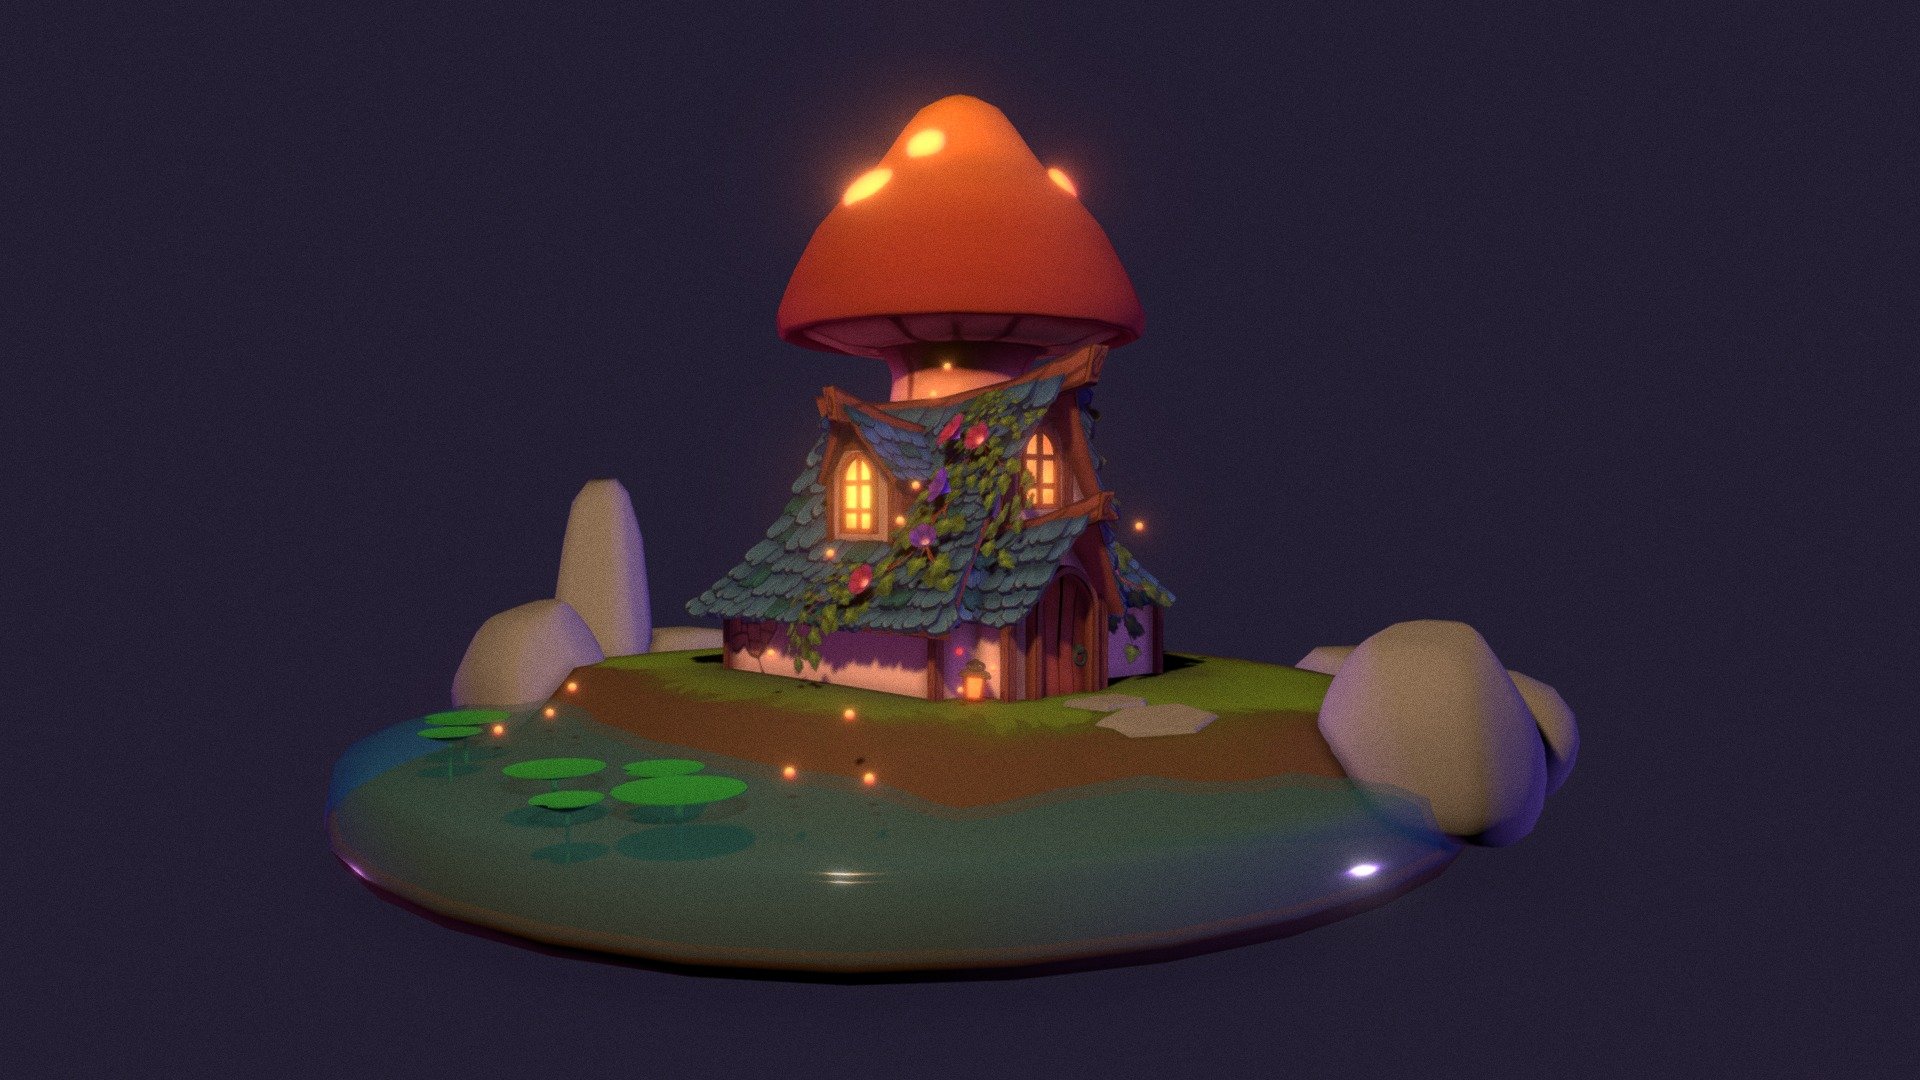 I created the mushroom house as an asset to be used for my project in my game development studio, but I wanted to create a base for a full diorama. I wanted to experiment more with stylized shapes and silhouettes 3d model